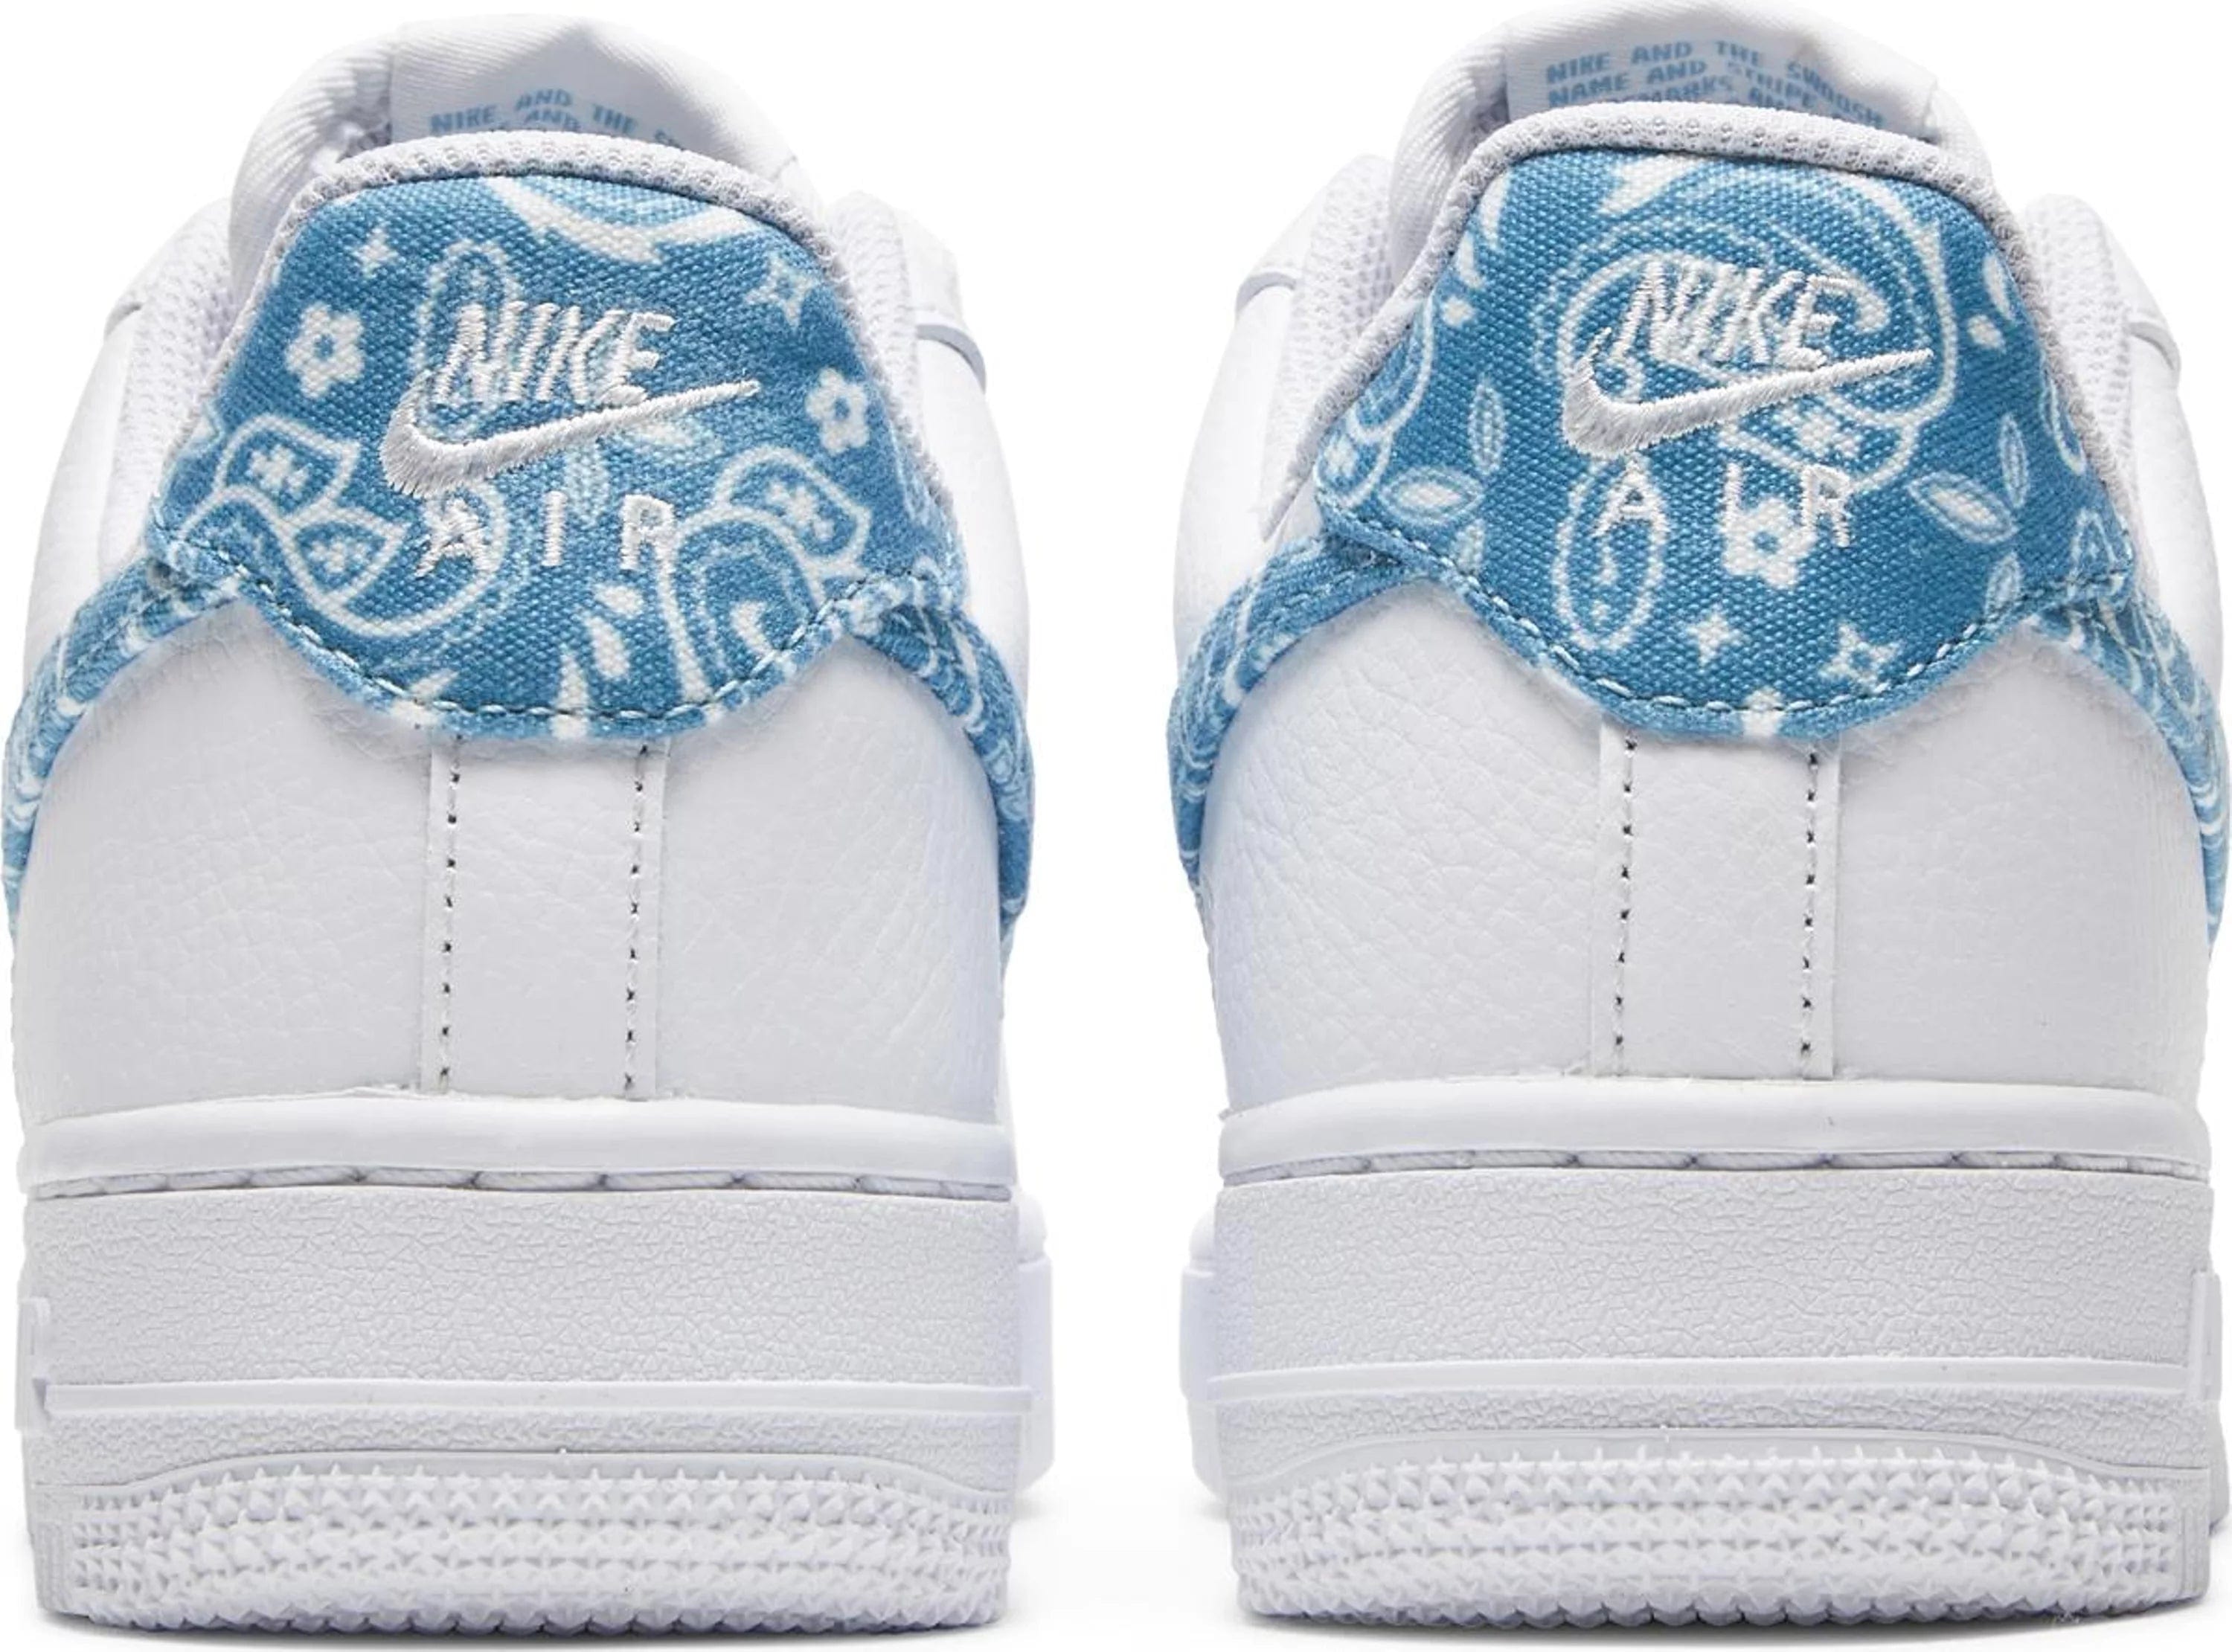 New Nike Air Force 1 Low Women's Size 10 / 8.5 Men White Blue Paisley  DH4406-100